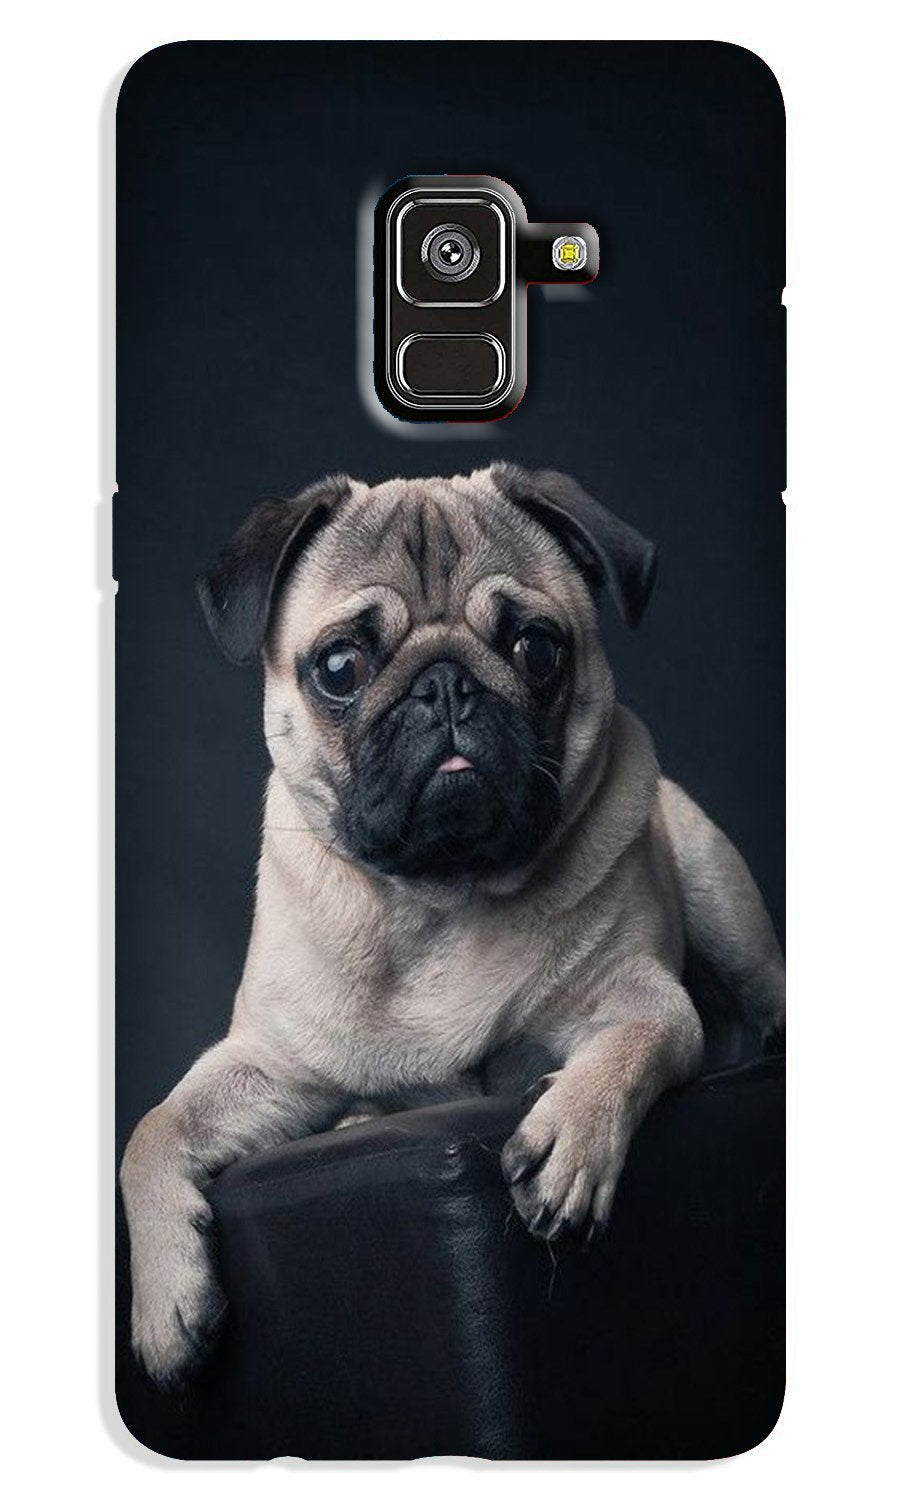 little Puppy Case for Galaxy J6 / On6